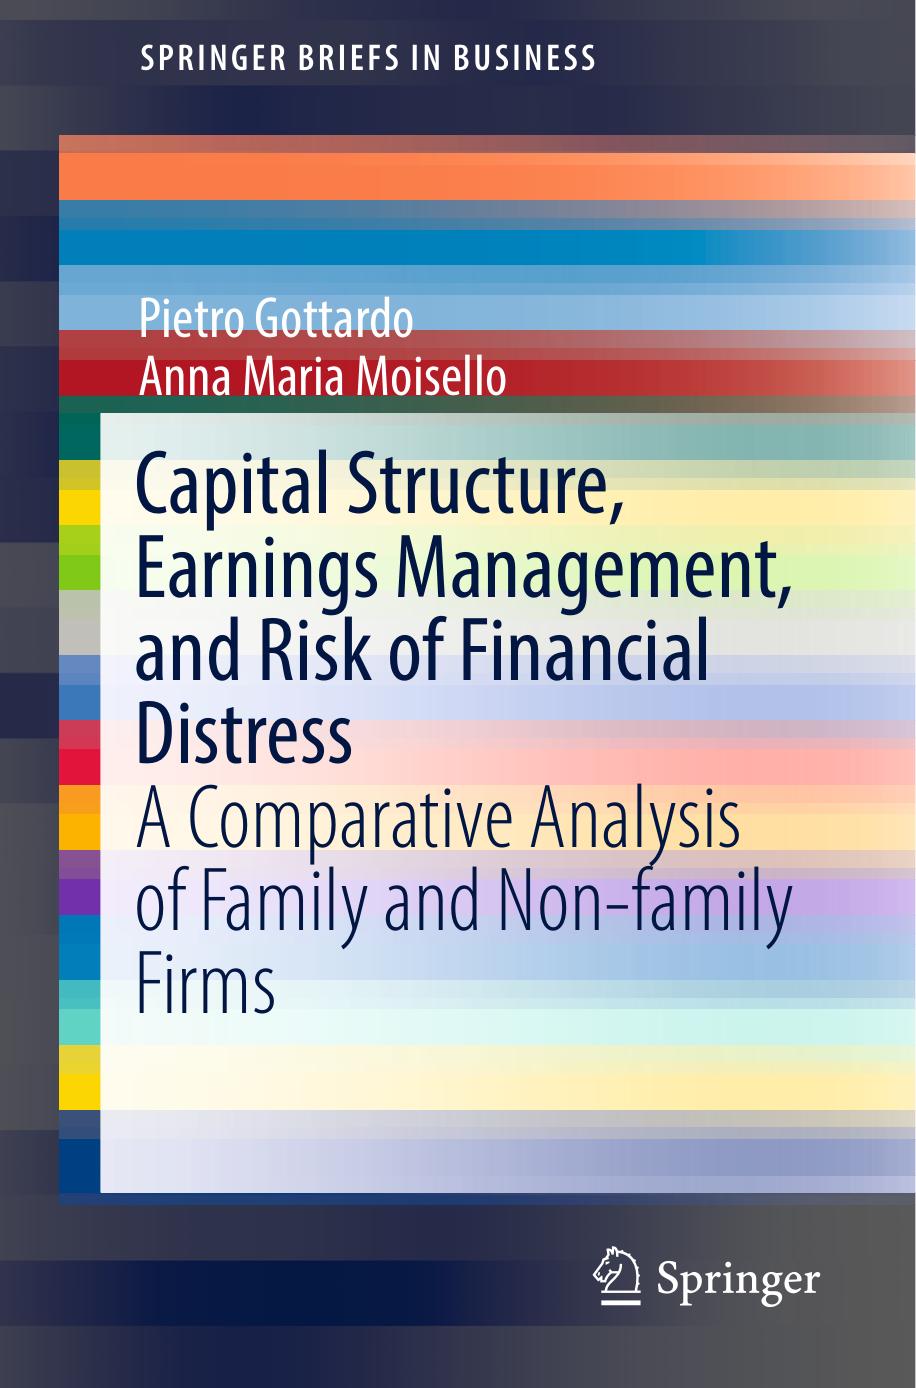 Capital Structure, Earnings Management, and Risk of Financial Distress 2019.pdf